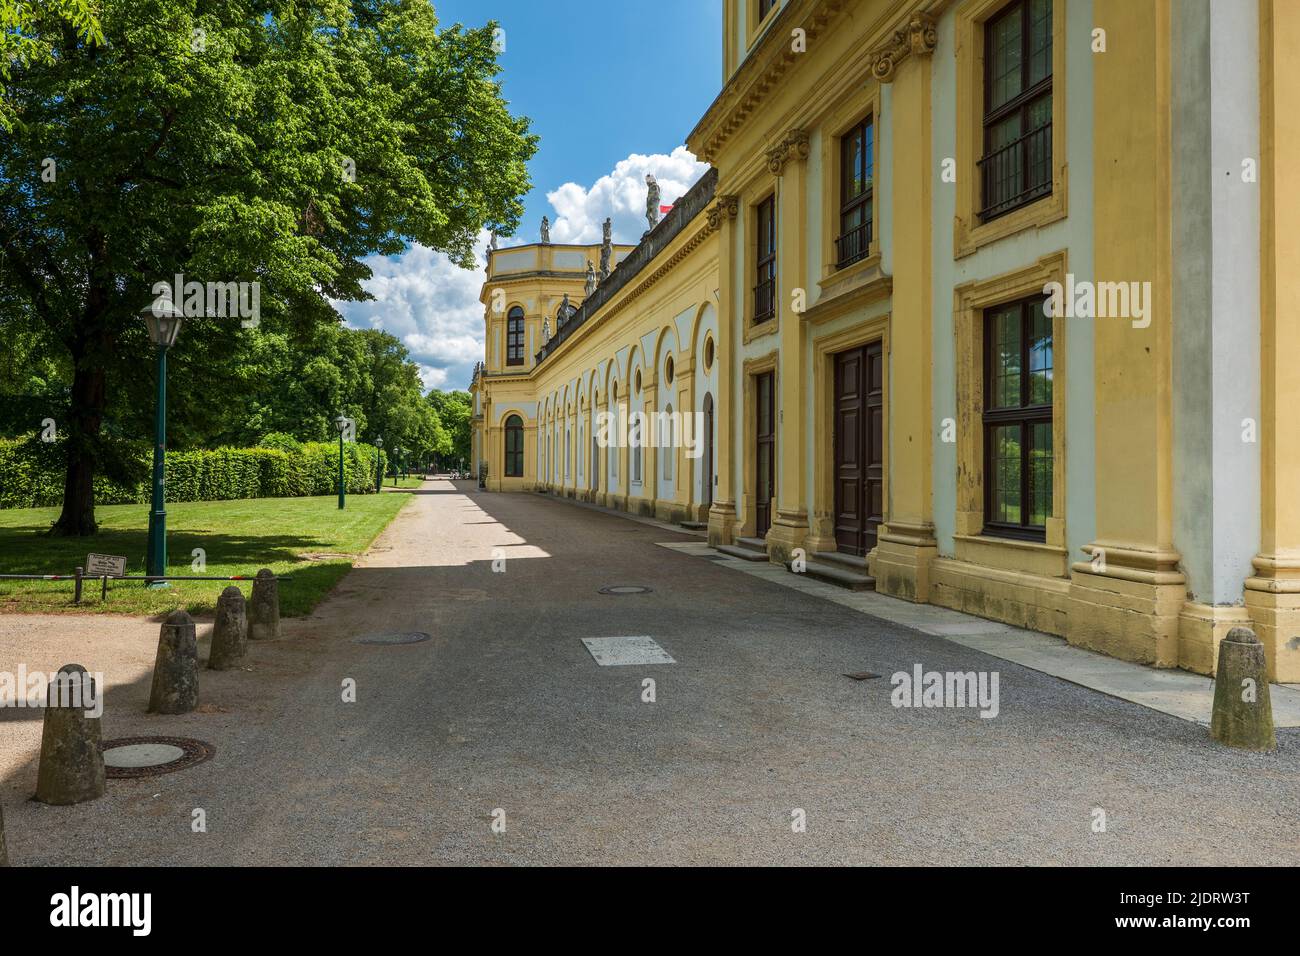 Rear view of the baroque orangery in Kassel, Hesse, Germany Stock Photo